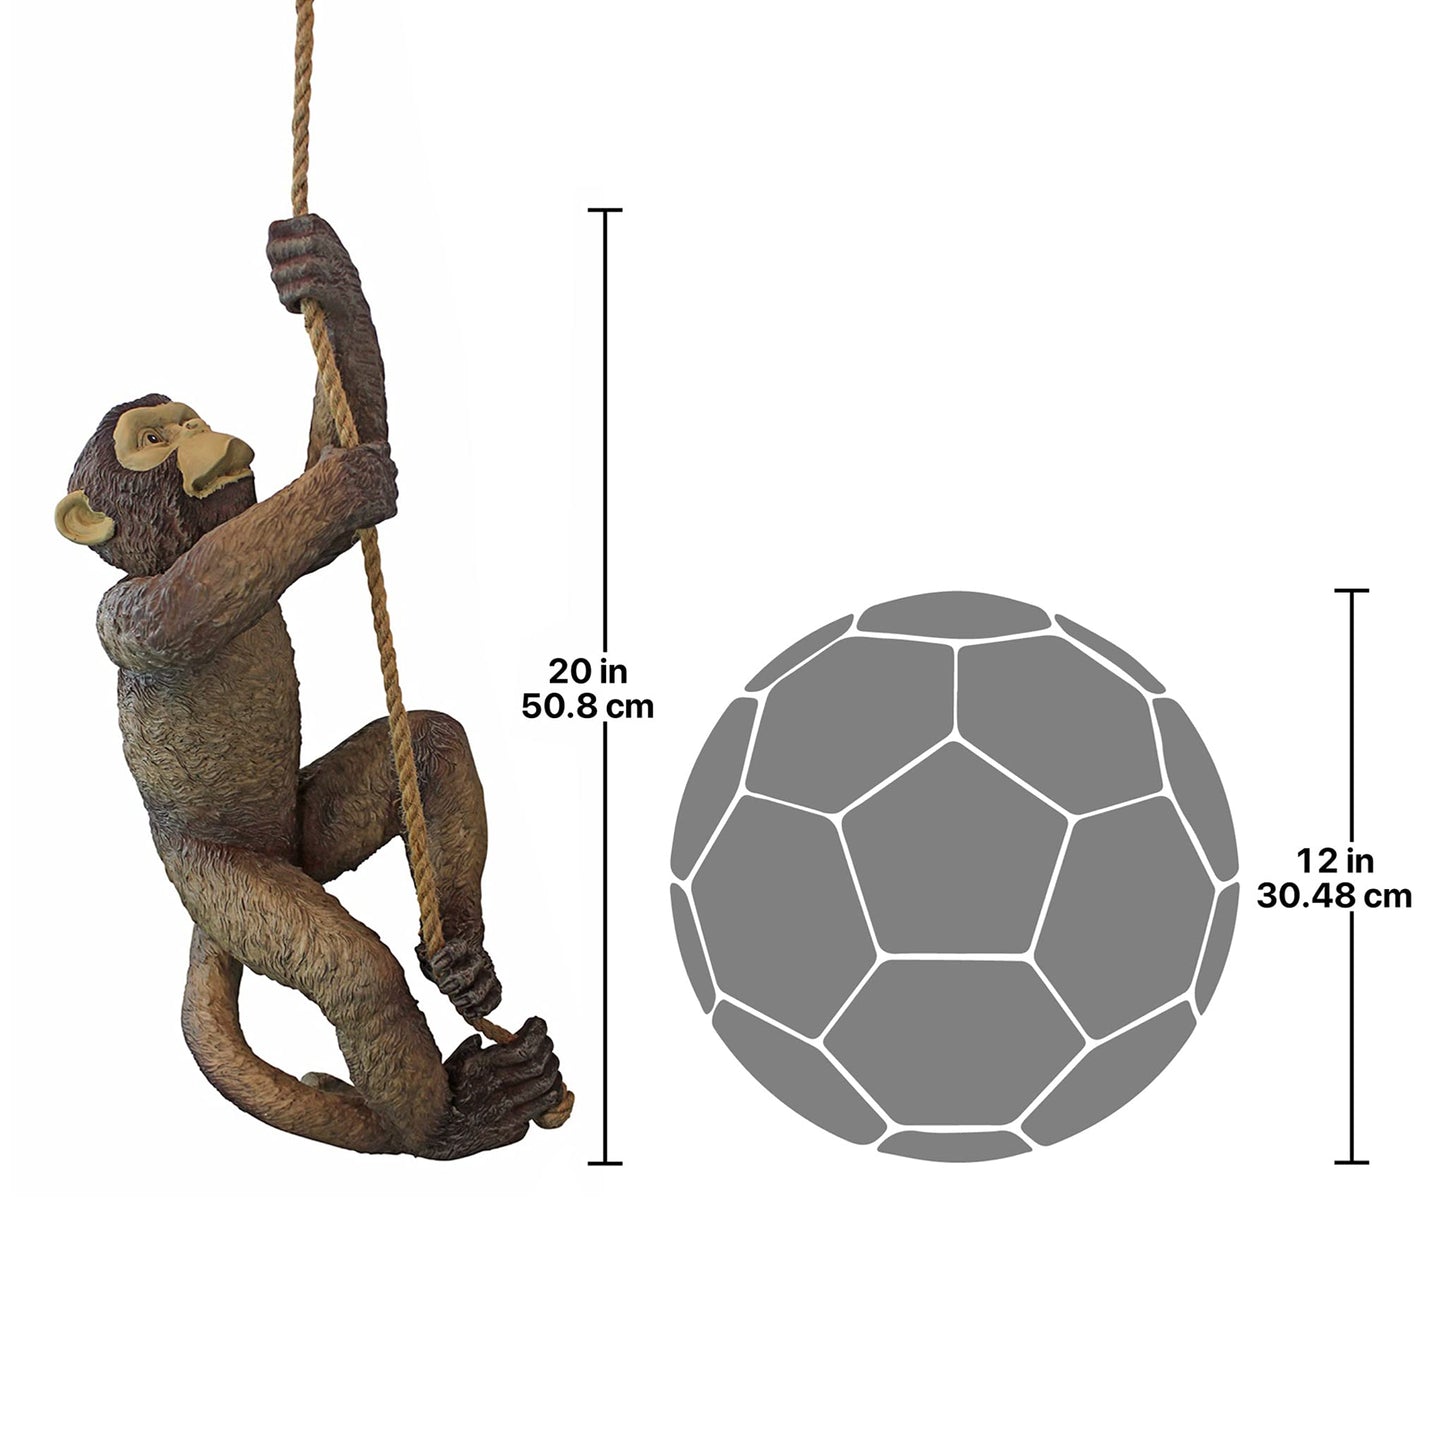 Size measurements of resin monkey climbing up a rope 20 inch x 12 inch